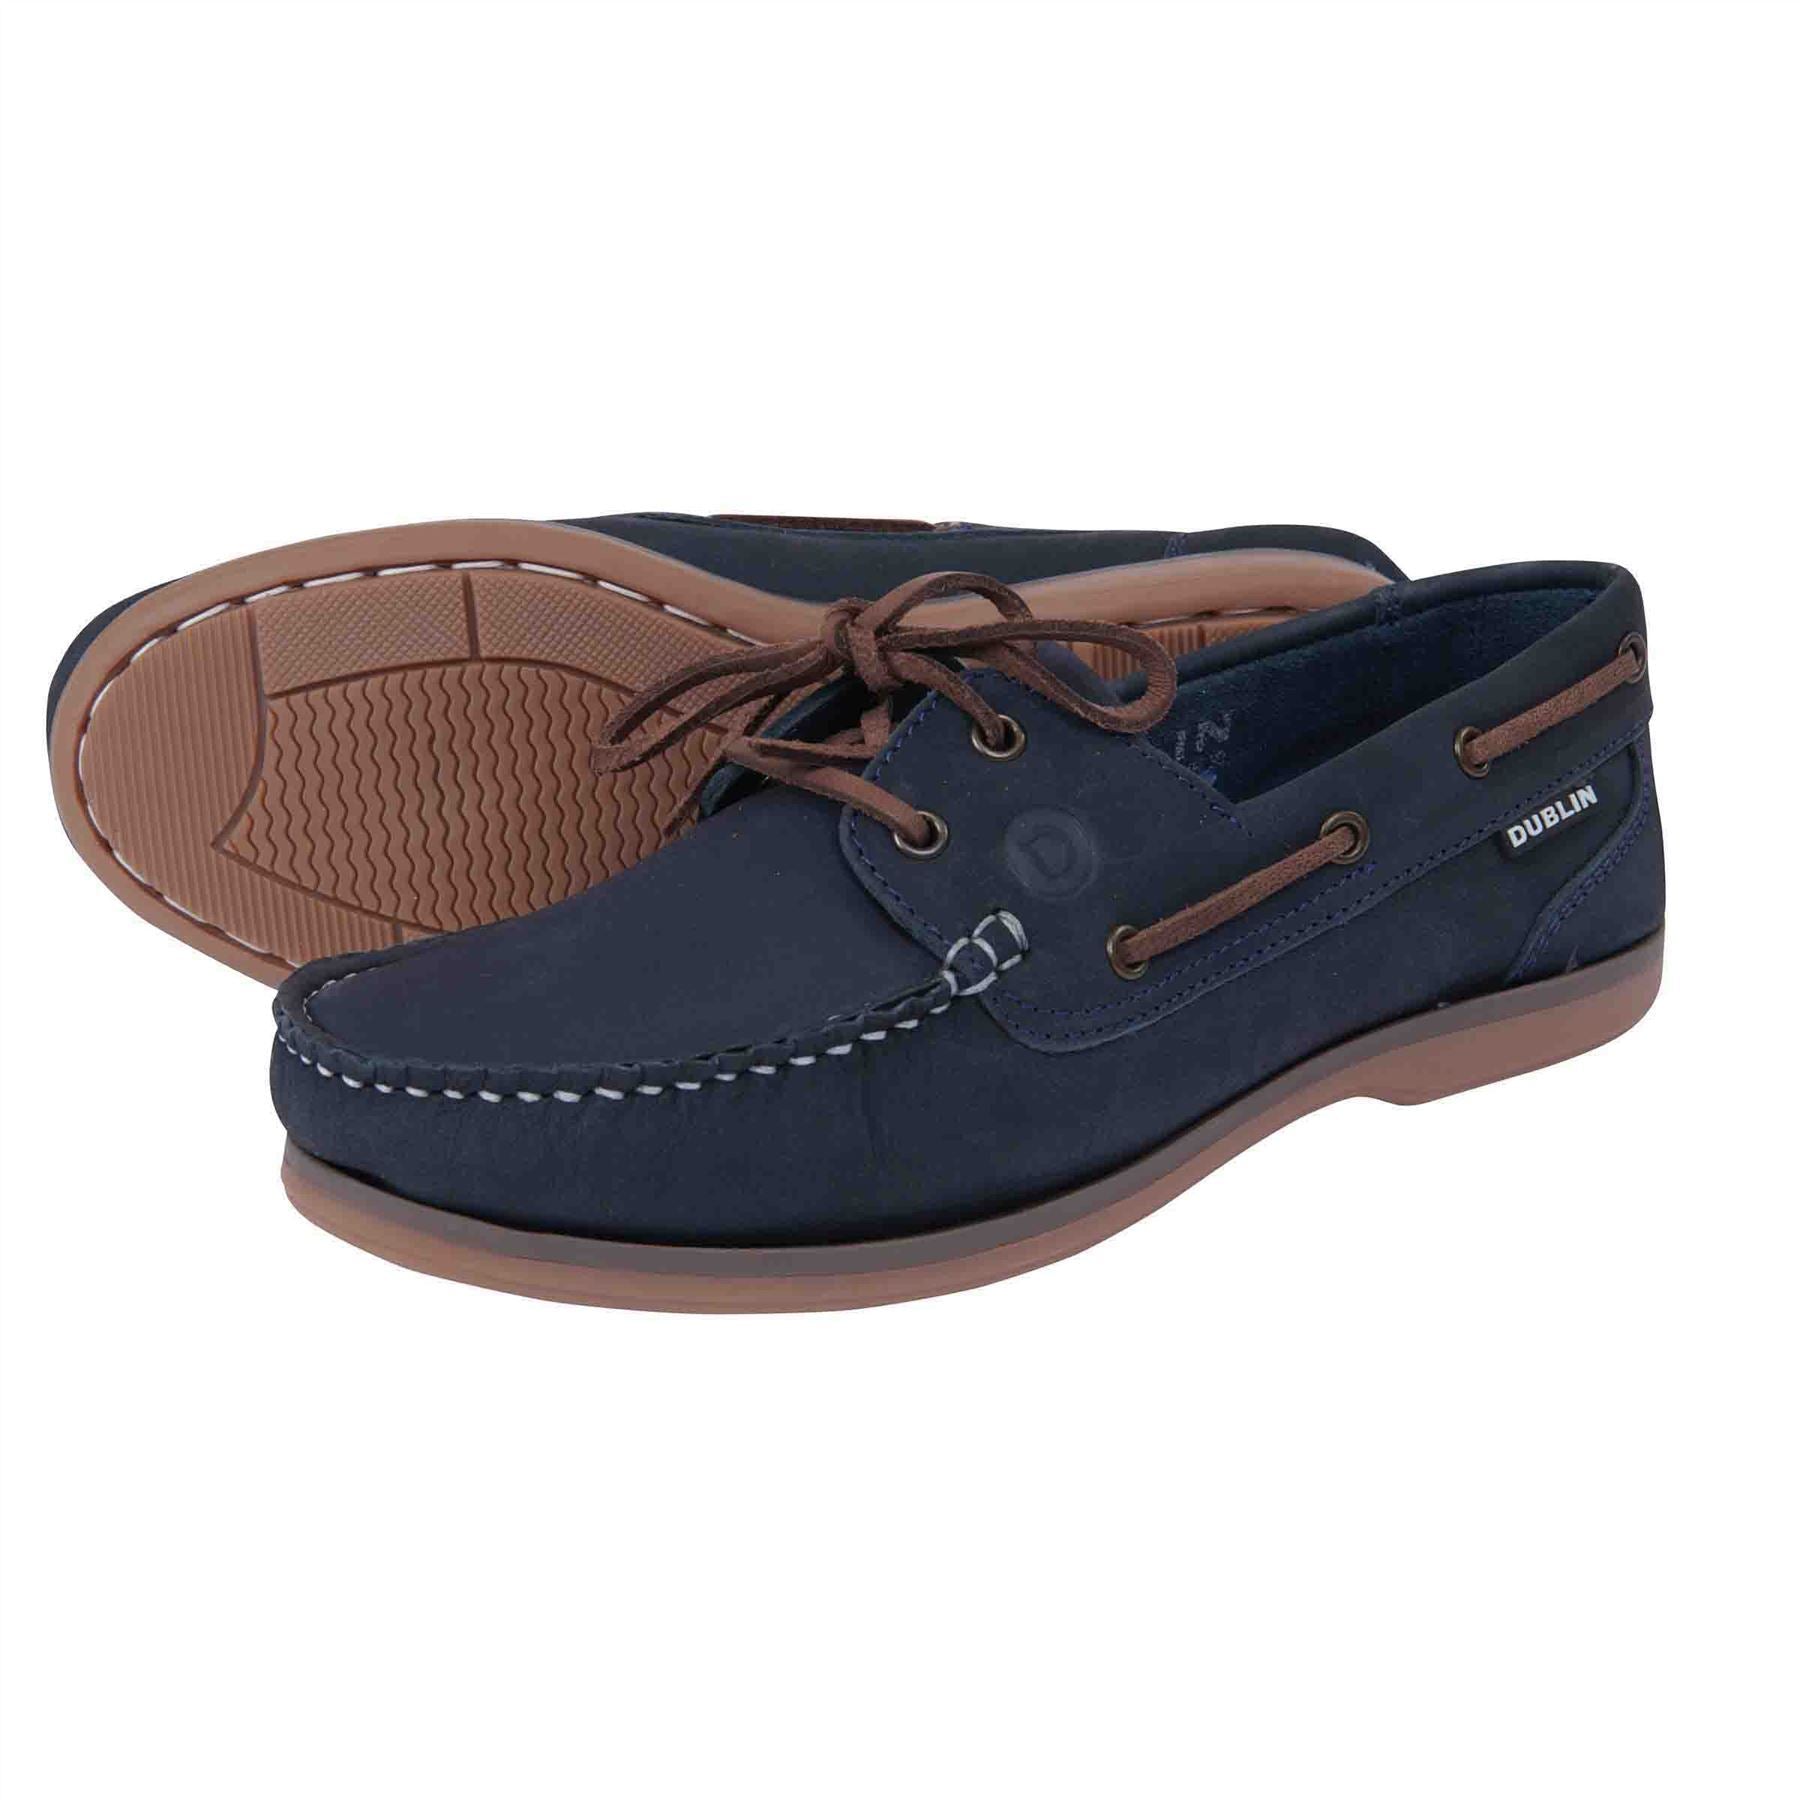 Dublin Broadfield Arena Shoes - Just Horse Riders